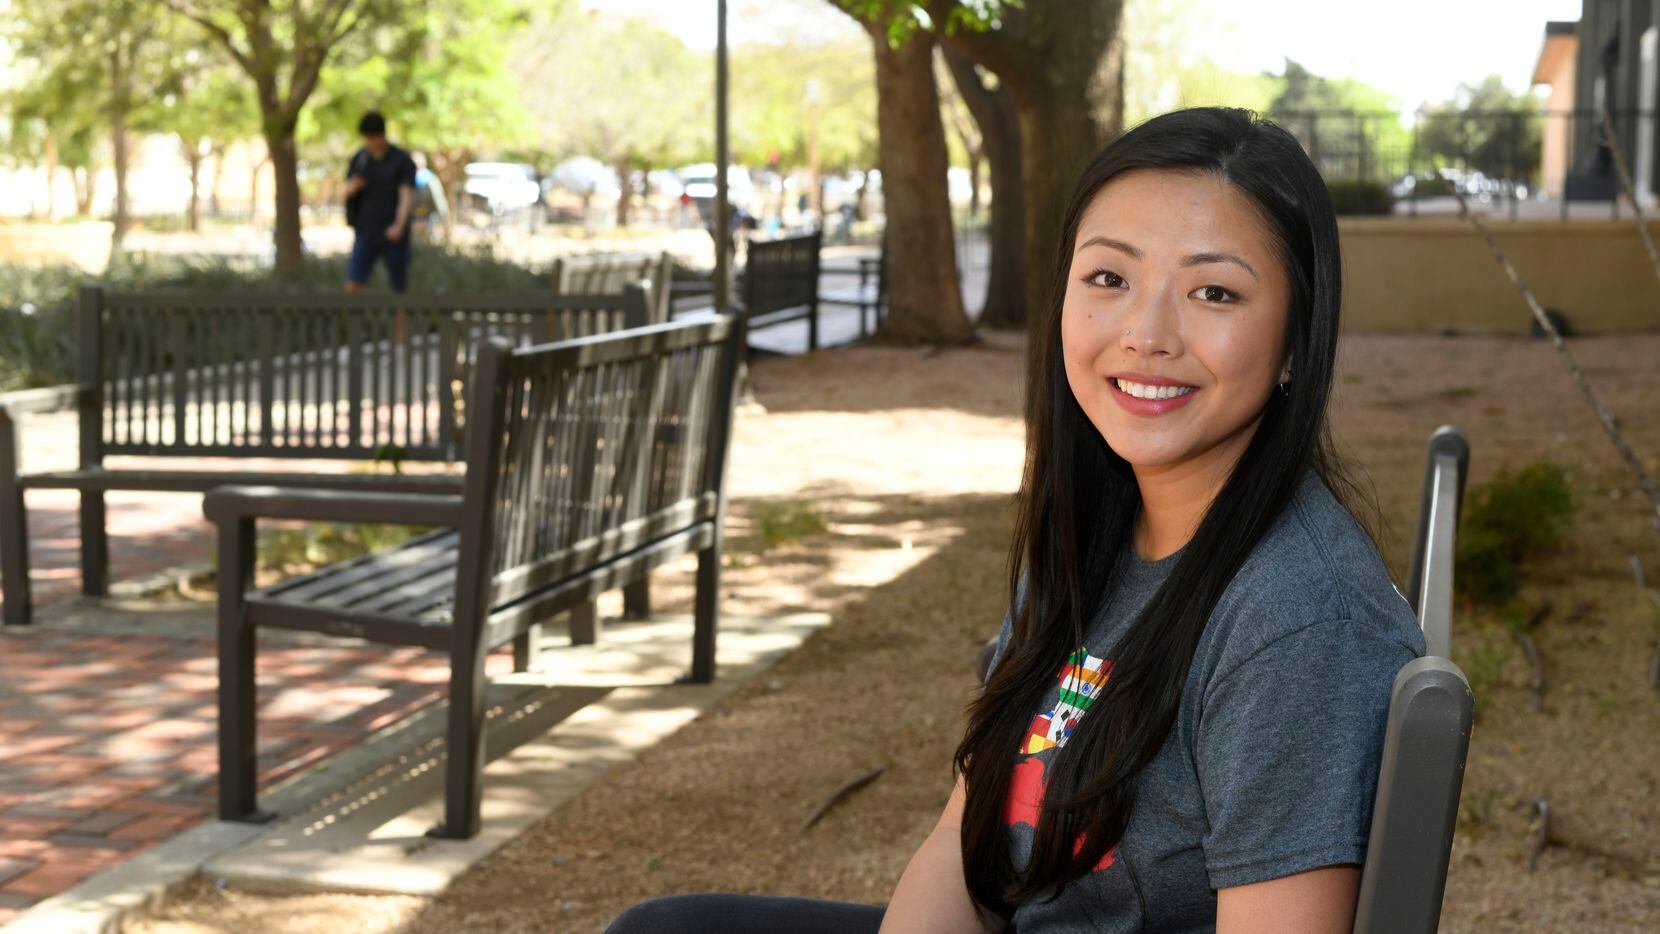 Yufei Wu, a senior at Texas Tech University, has struggled over the past few years with...